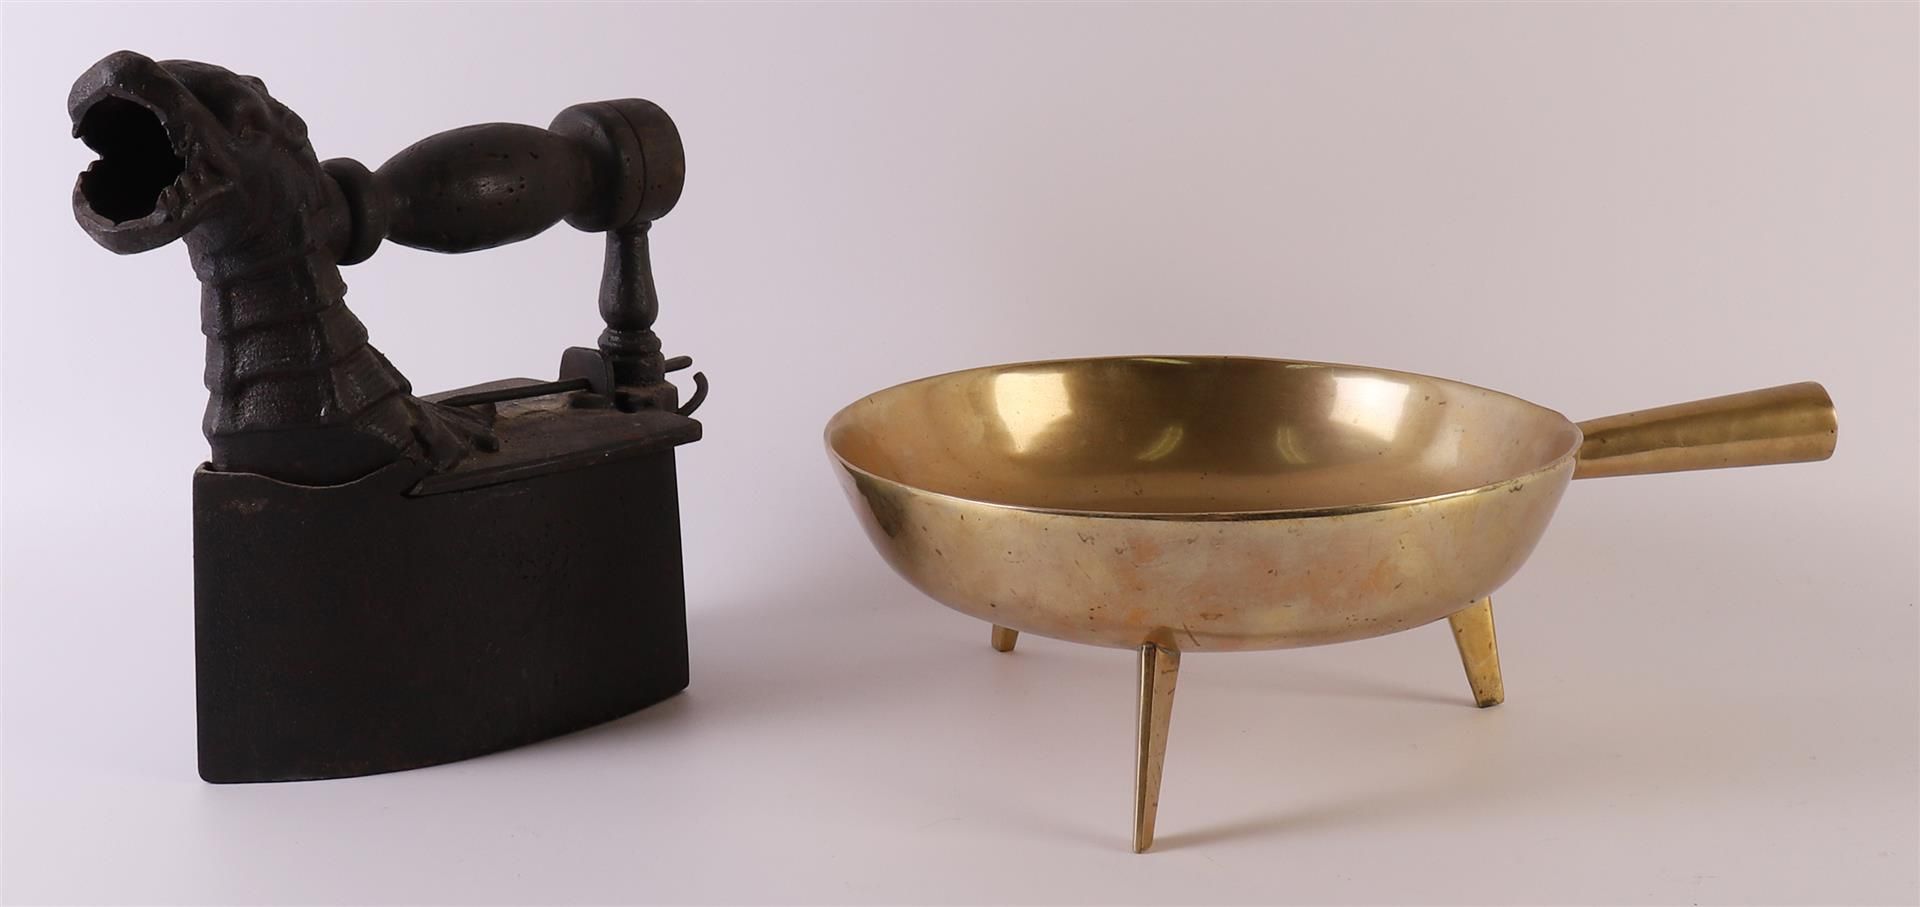 A bronze pan on tripod, 18th century, h 10 x Ø 24 cm (without stem). Here is a cast iron coal